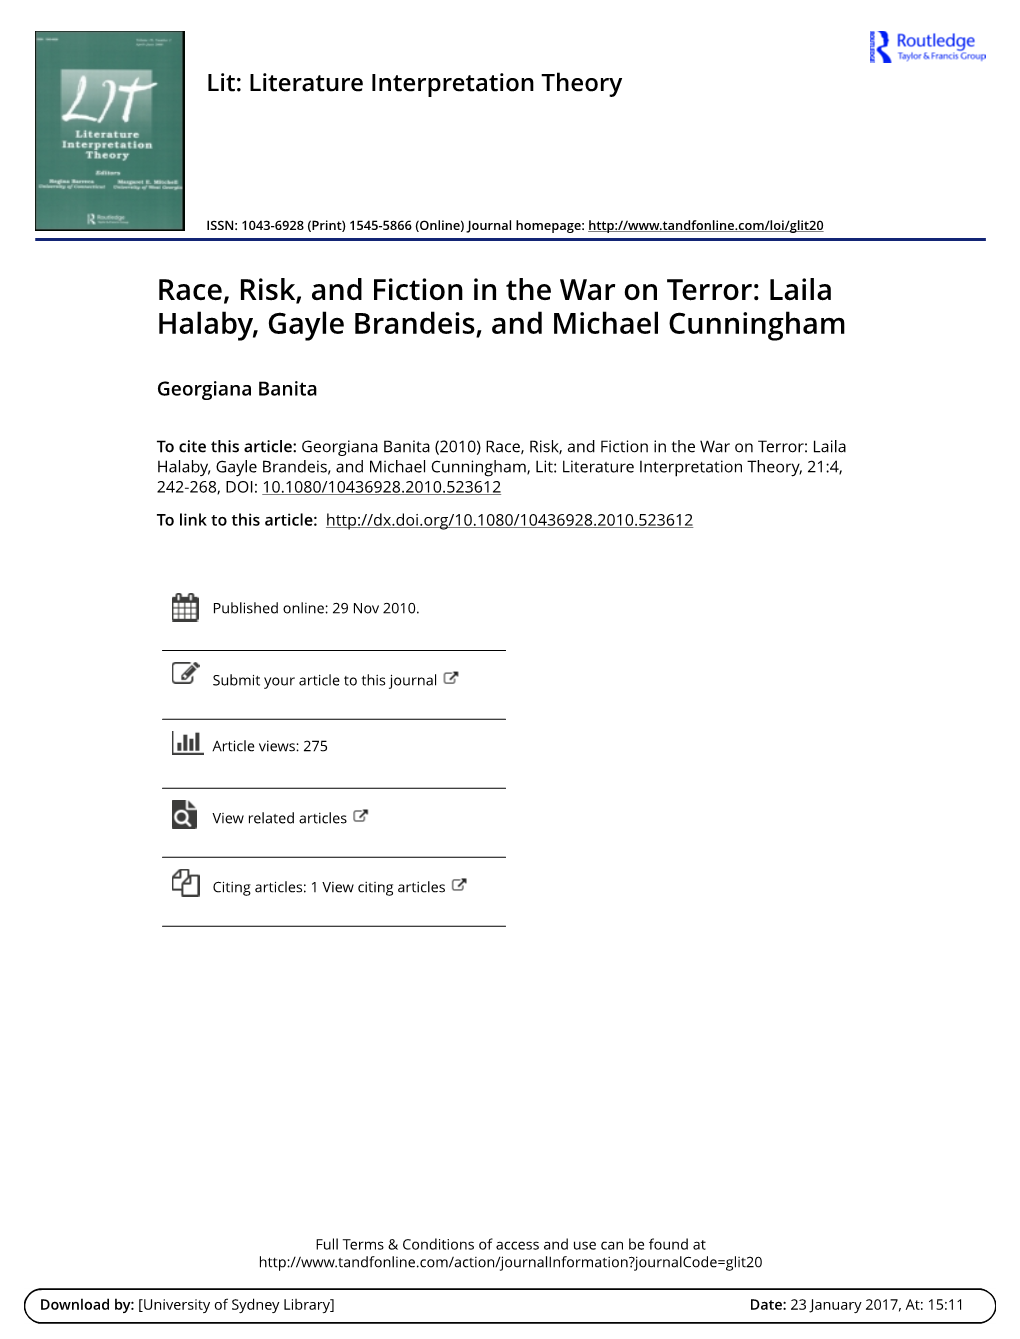 Race, Risk, and Fiction in the War on Terror: Laila Halaby, Gayle Brandeis, and Michael Cunningham